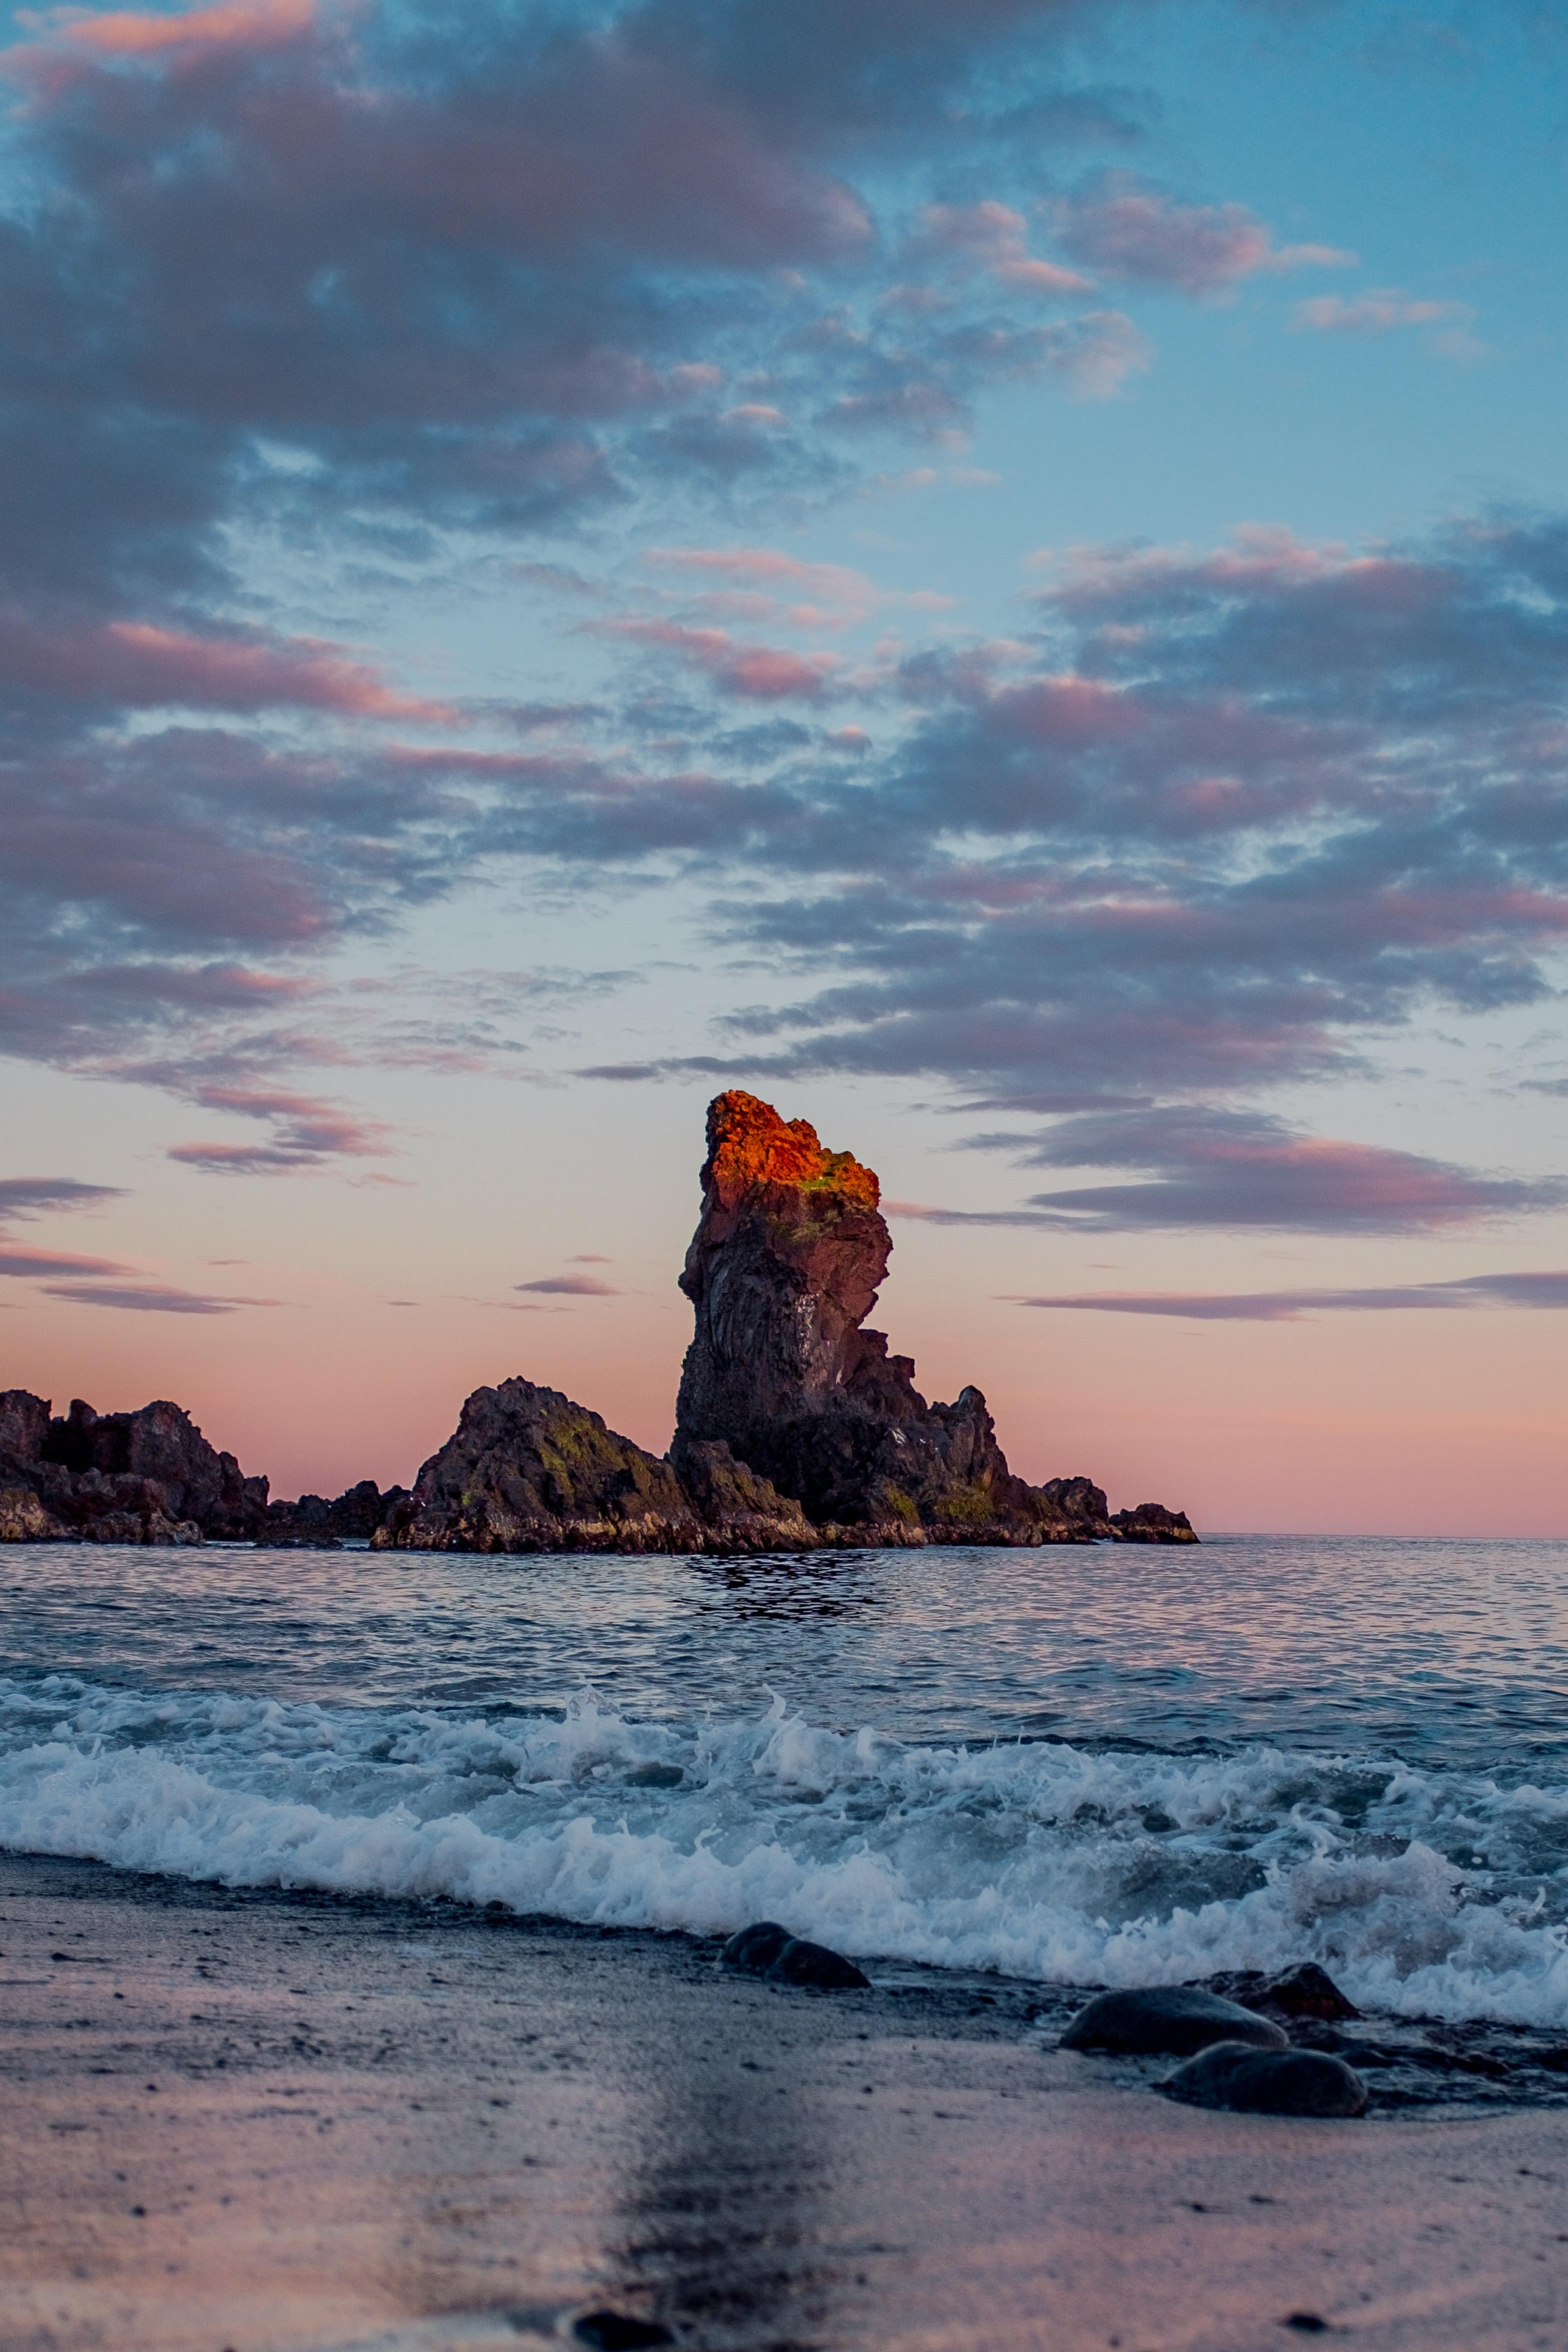 Imposing sea stack stands tall against a backdrop of the sky awash with warm sunset hues of oranges, pinks, and purples